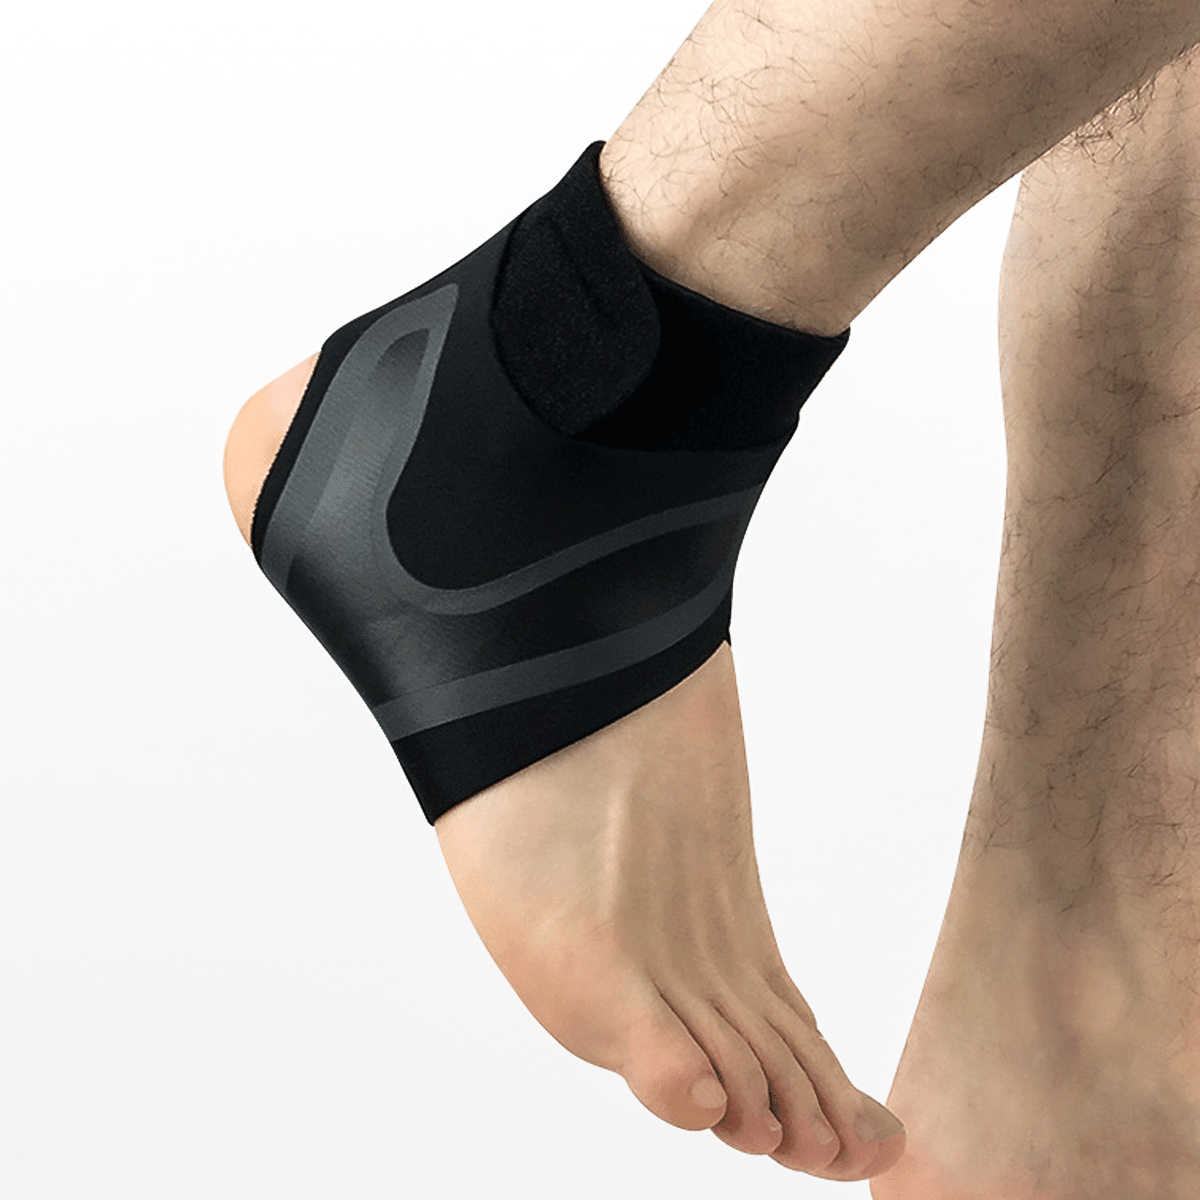 Bicycle Brace Ankle Protecter Protects Ankle Support Bandage Sports Product 